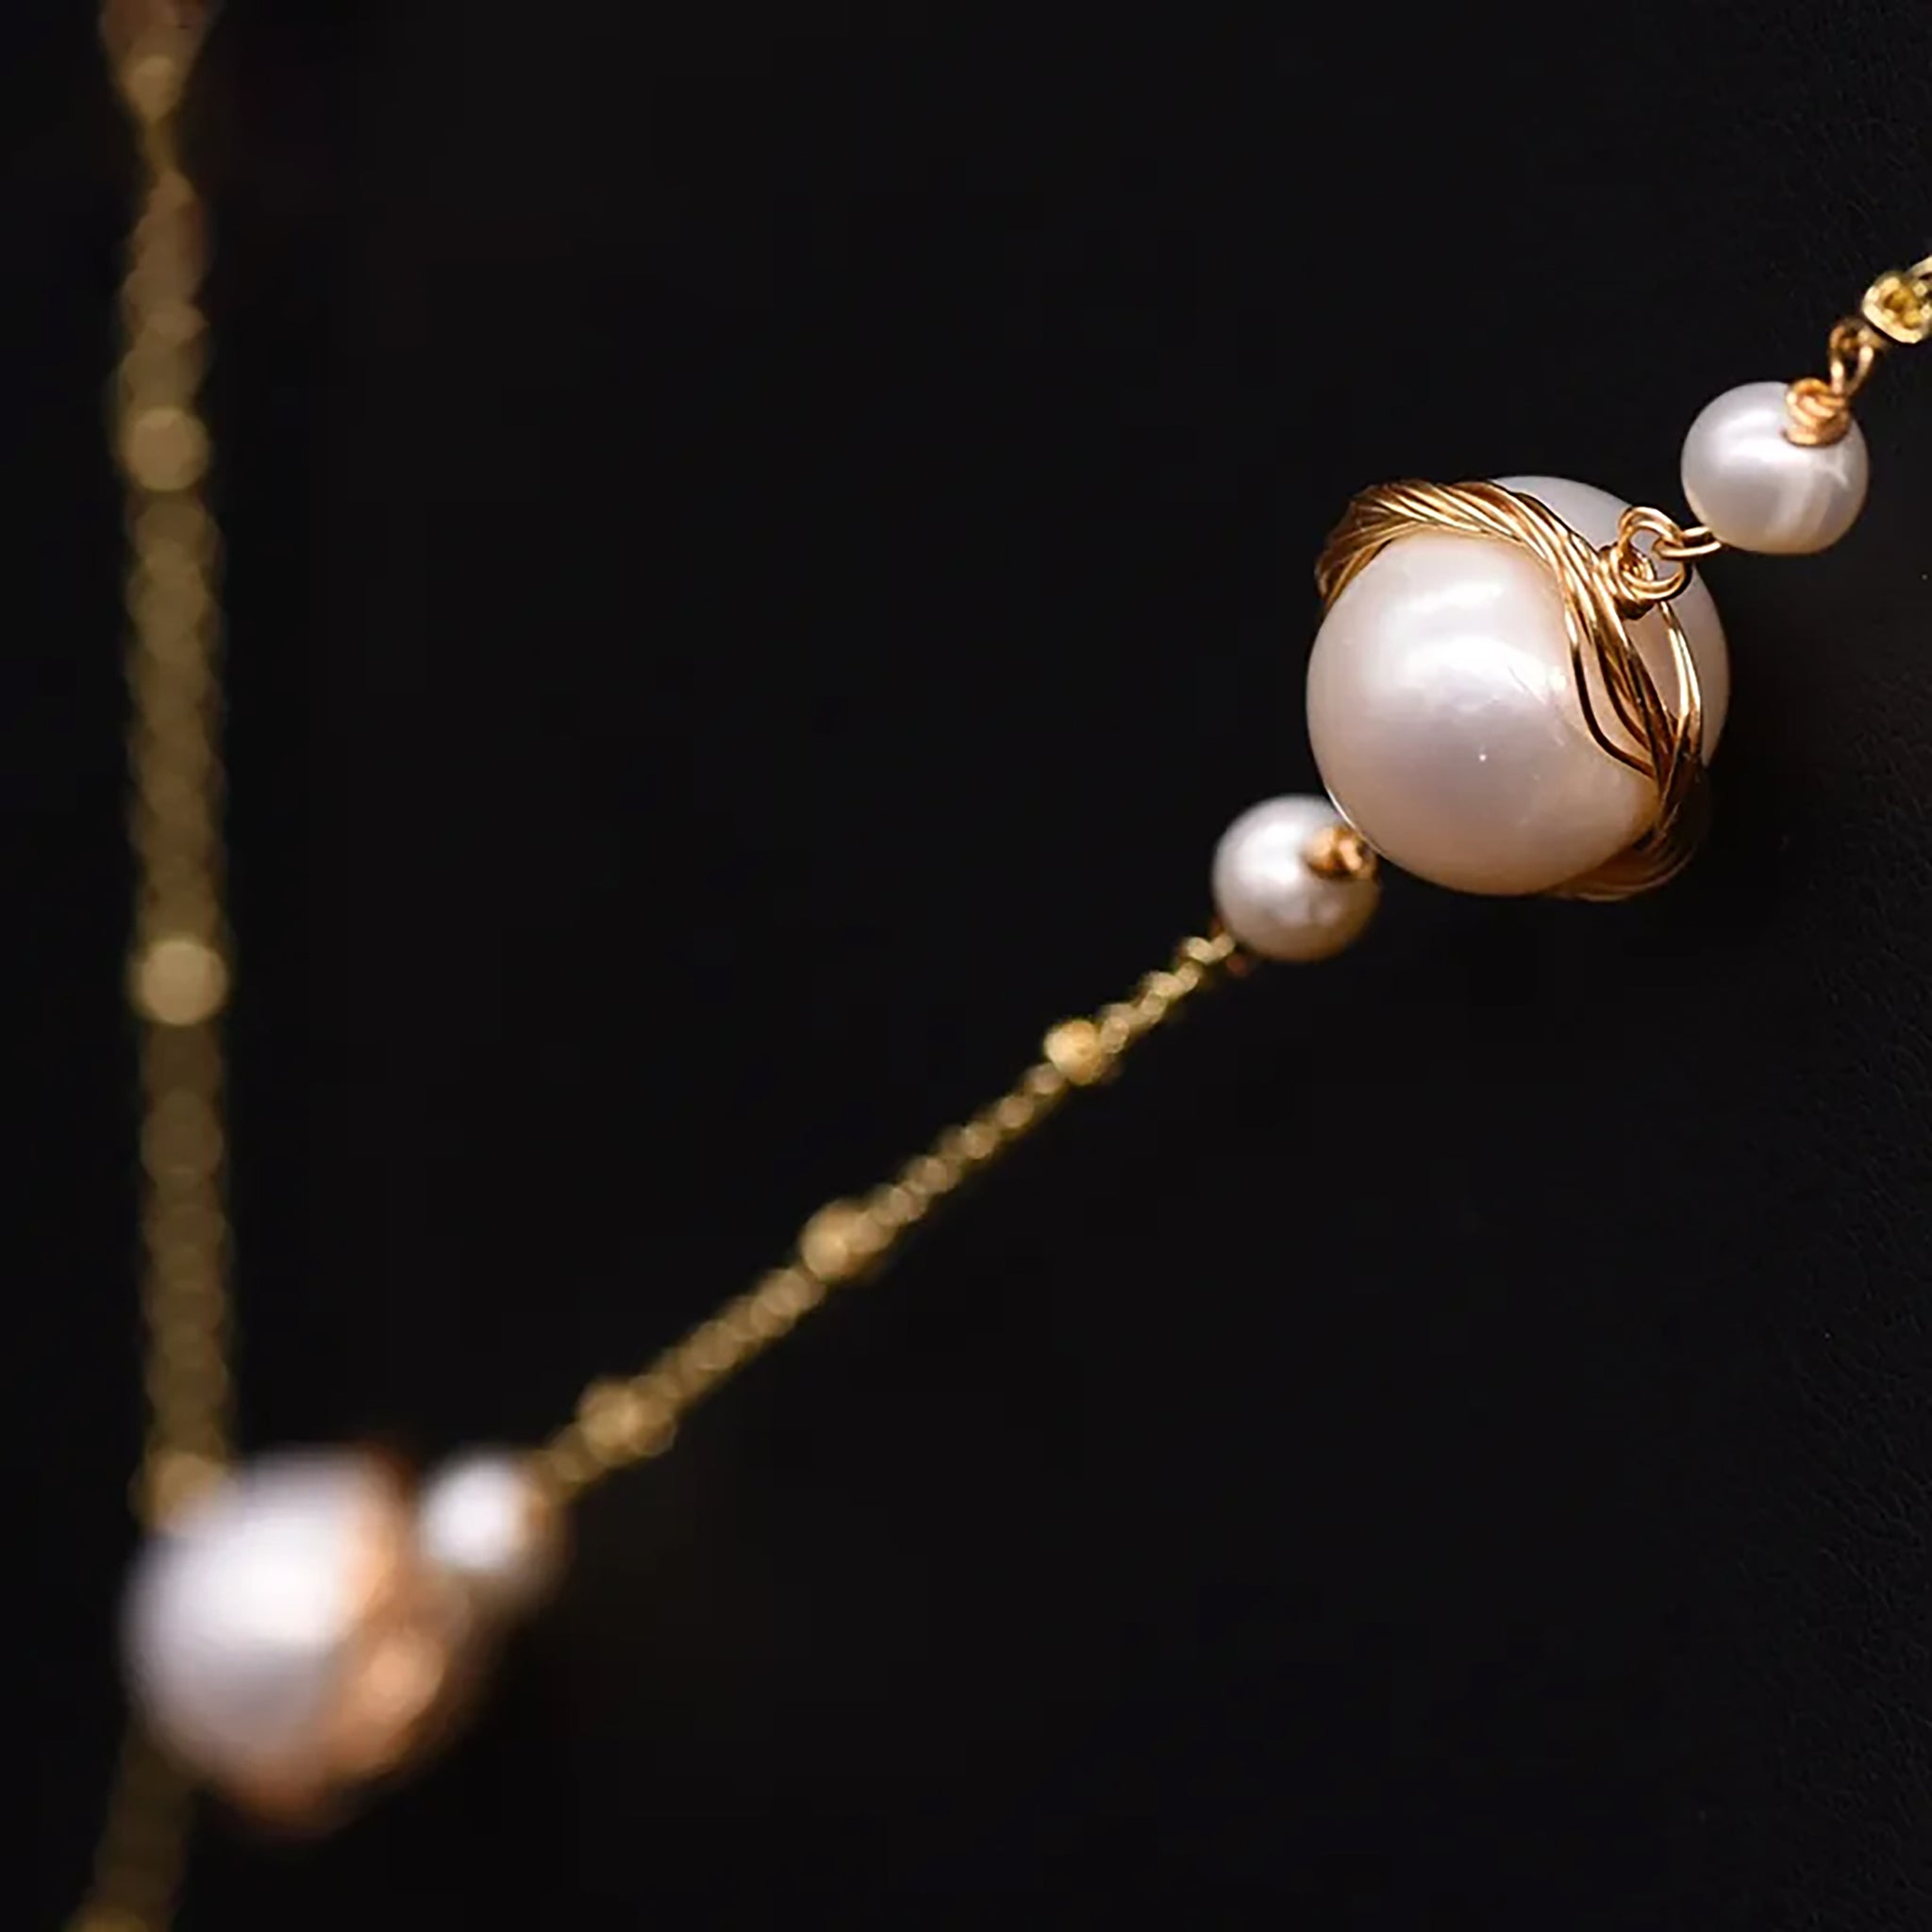 Chokore Drop Necklace with Freshwater Pearl